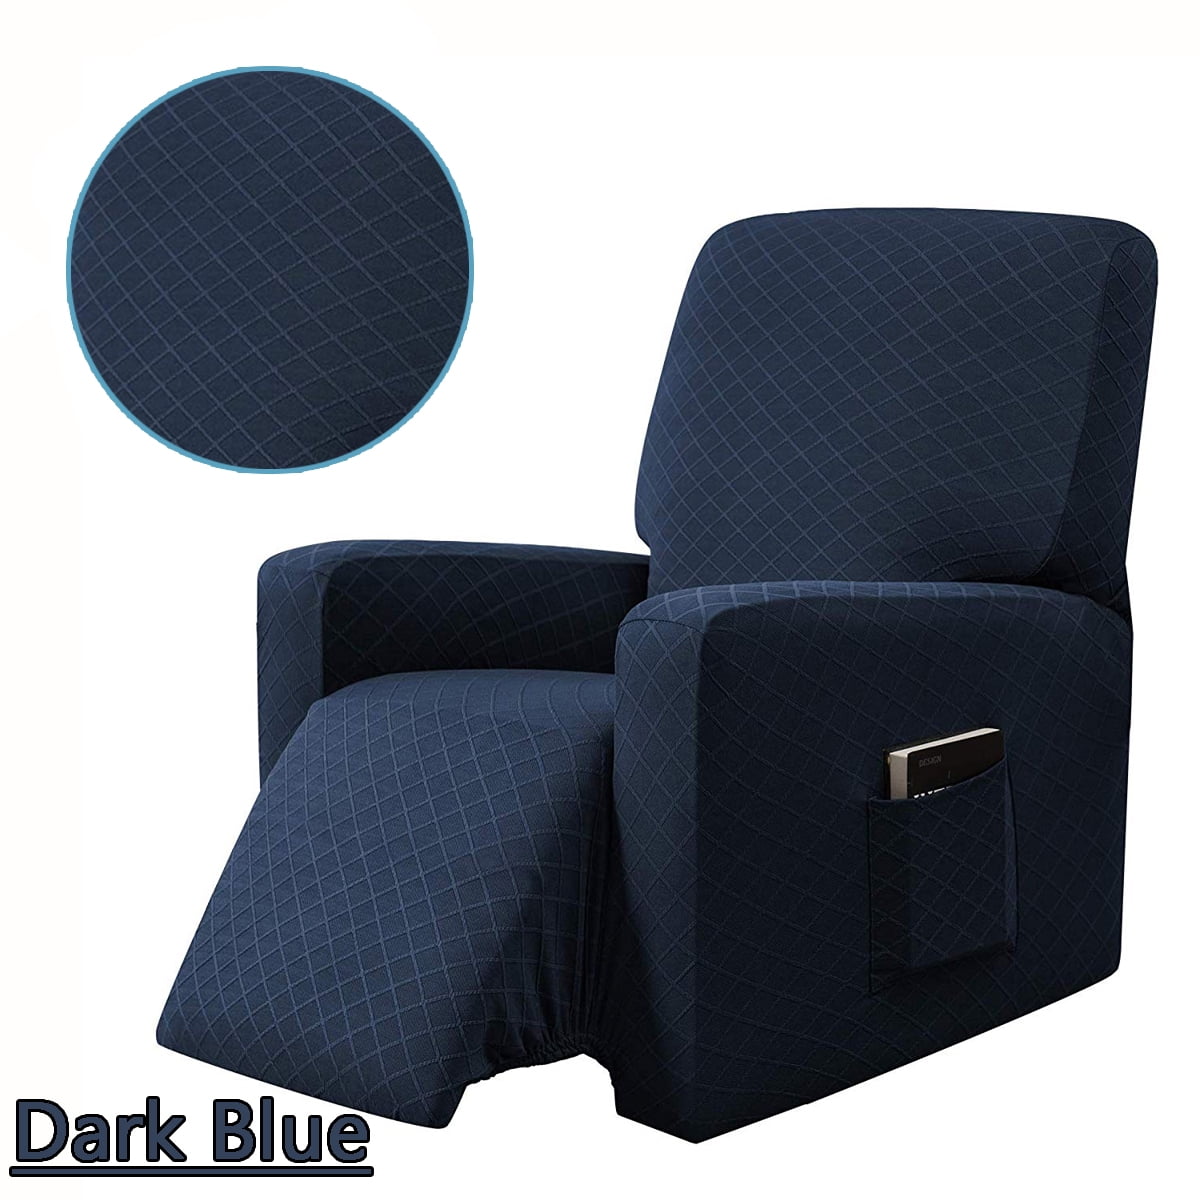 Details about   Stretch Recliner Slipcover Chair Sofa Couch Cover Protector Elastic Bottom 4 PCS 